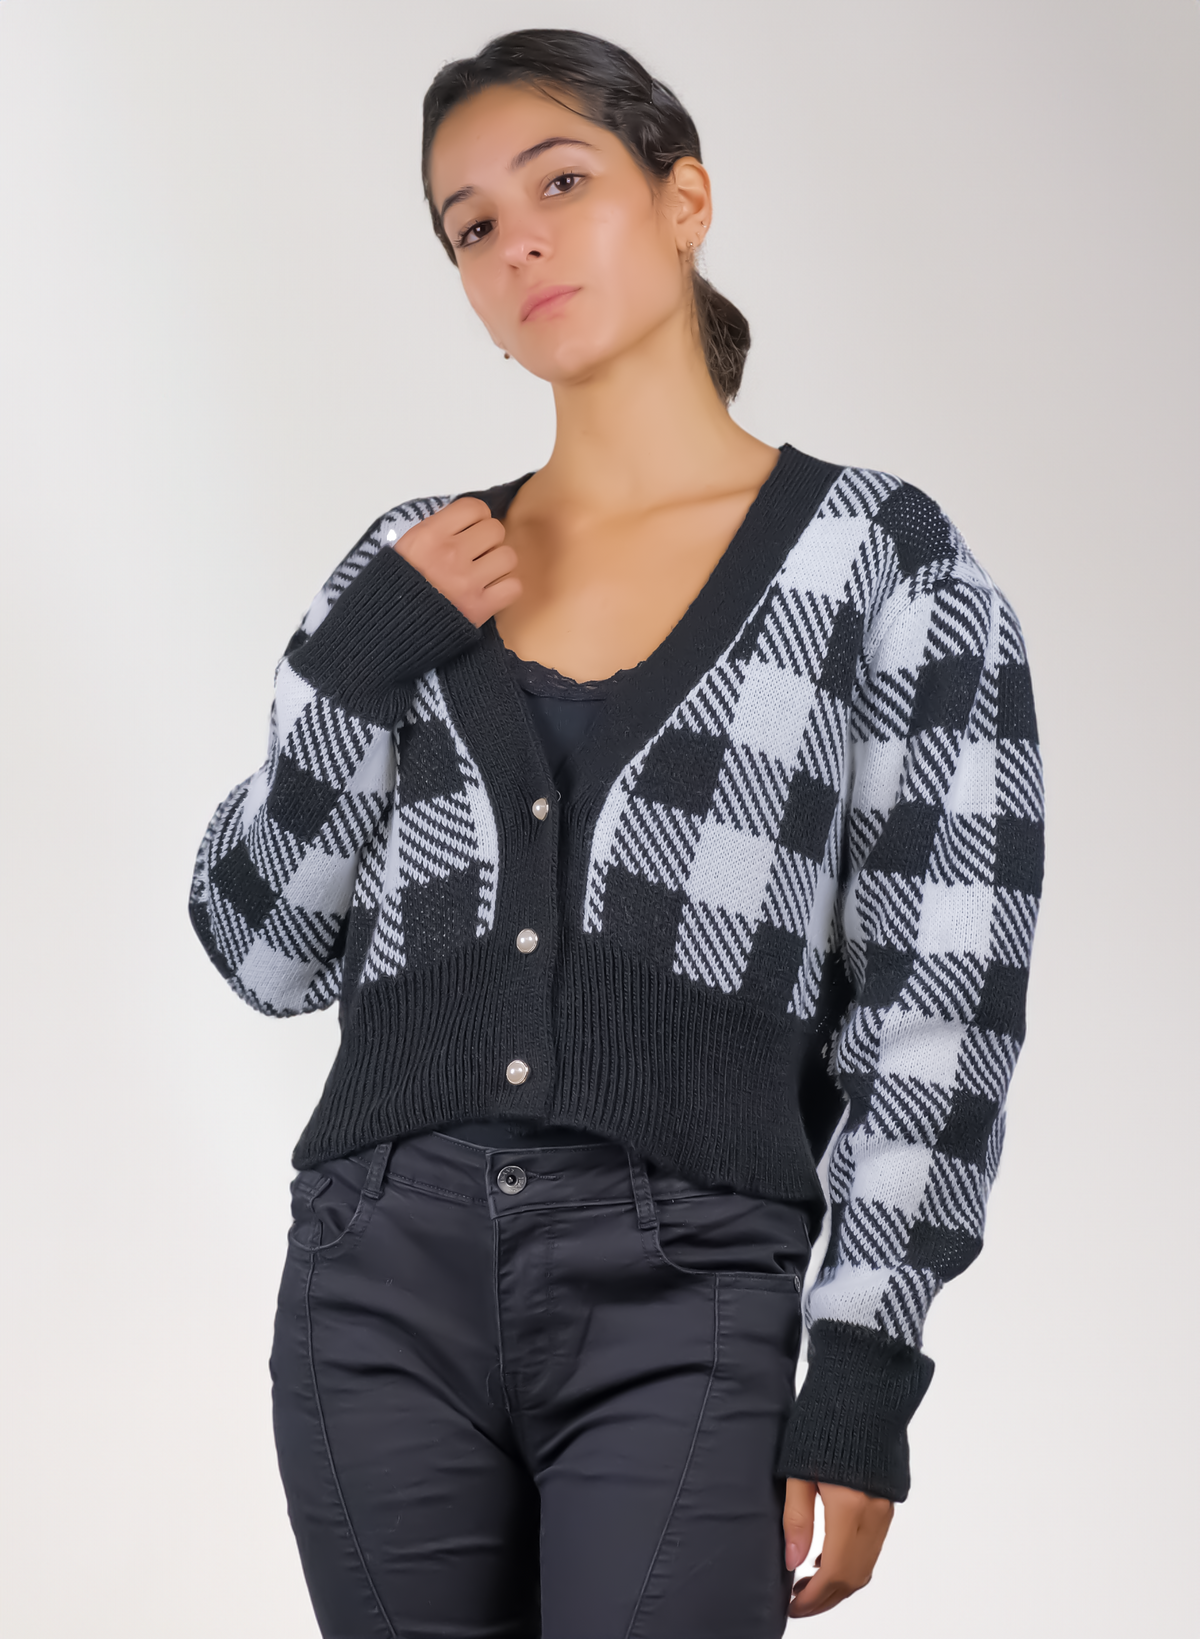 Chess women's cardigan with buttons